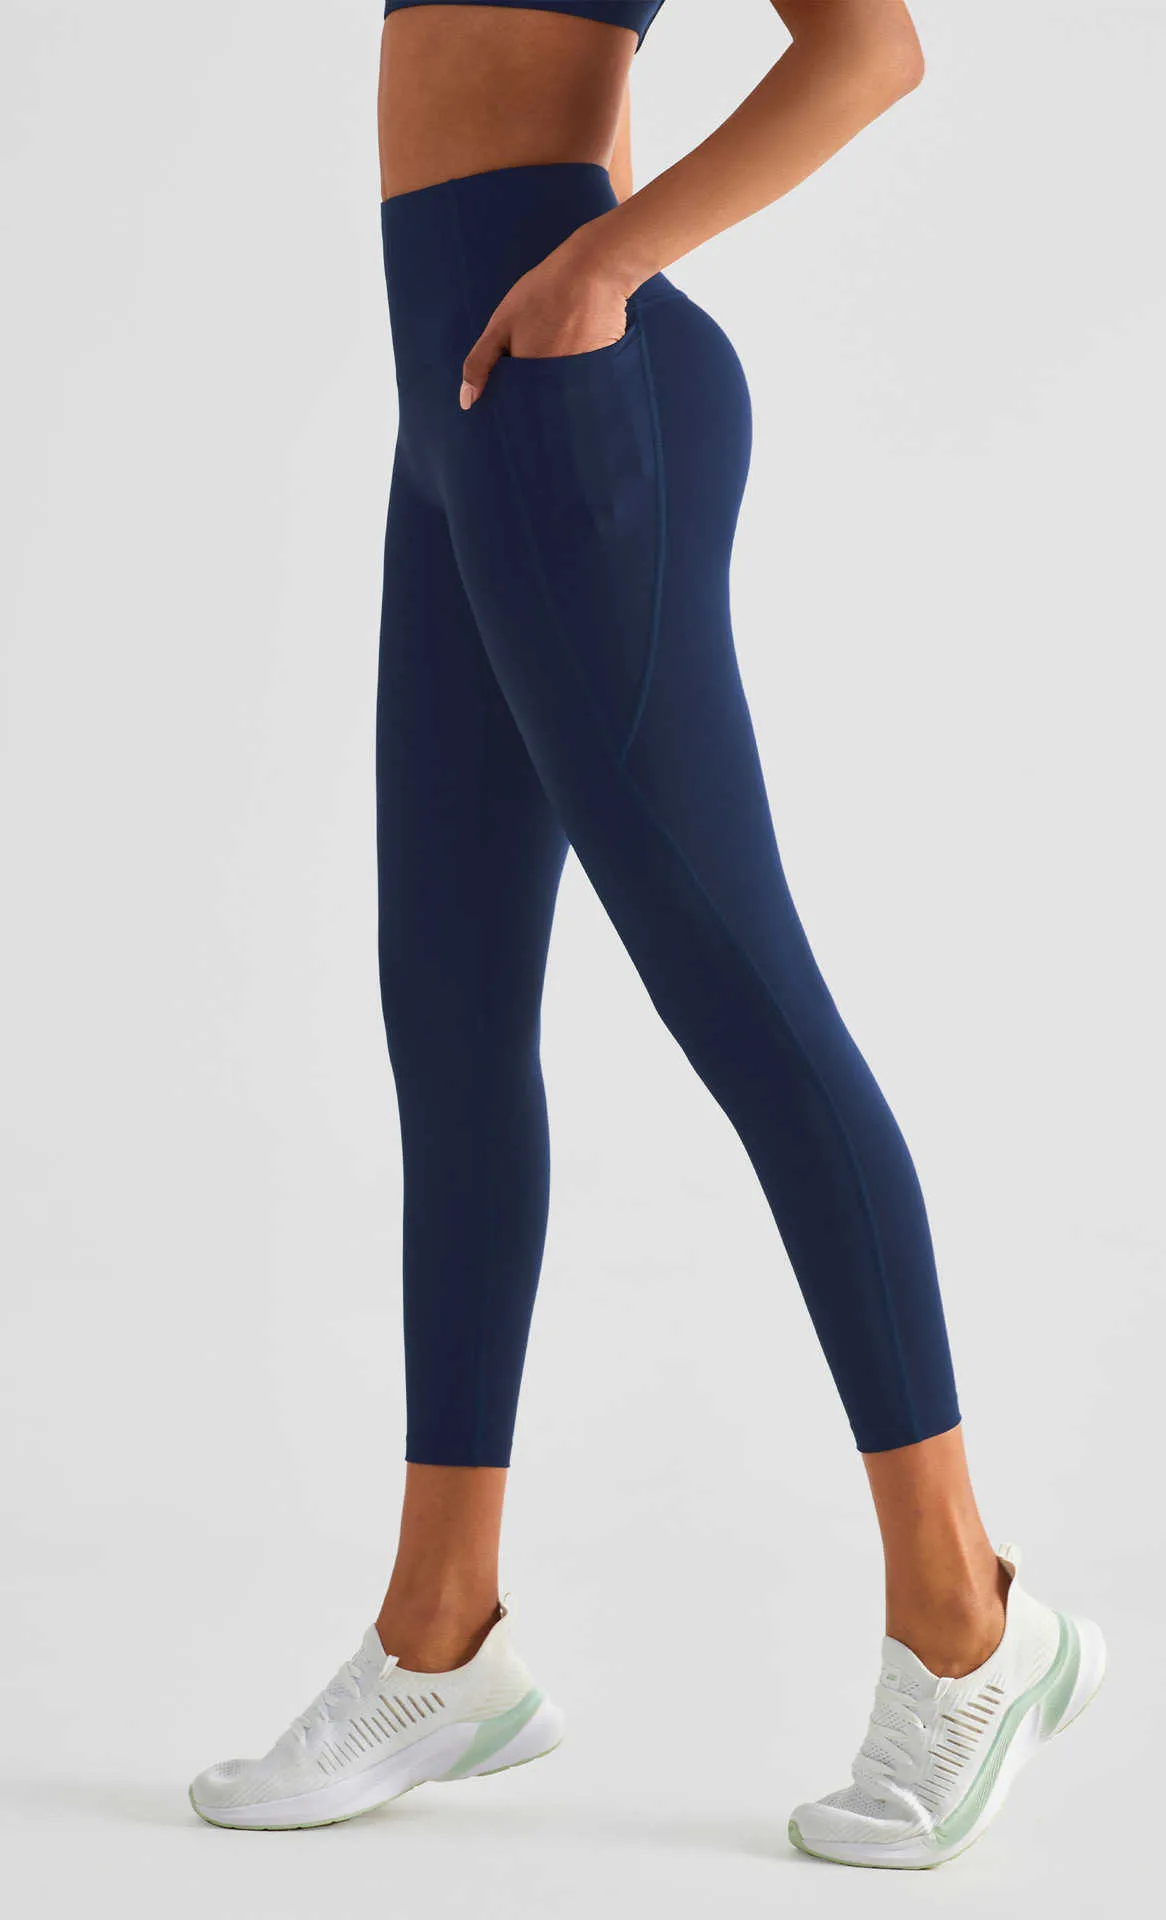 High Waist Petite Bubblelime Yoga Pants  With Pockets For Women  Perfect For Gym, Running, And Raising Workouts From Omgshop66, $83.09